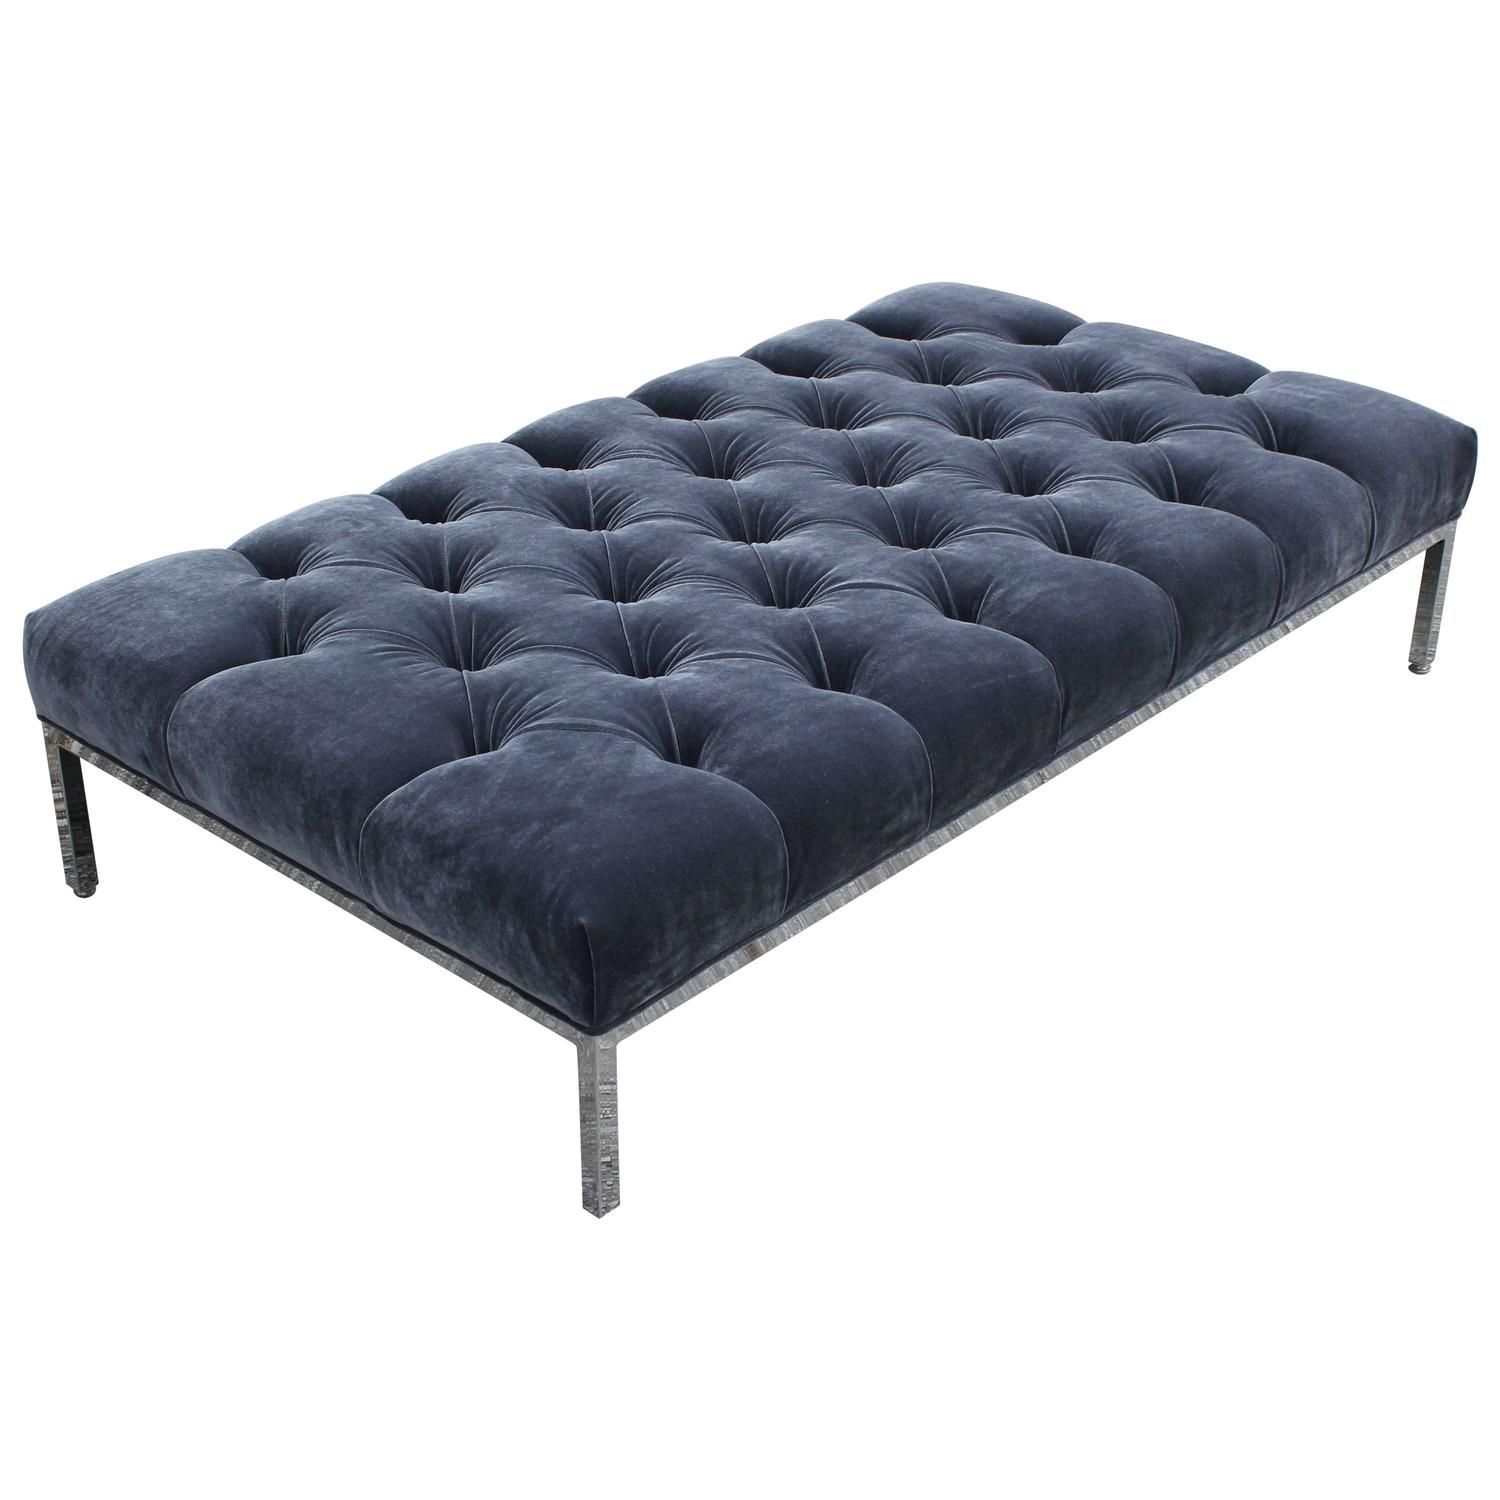 Fabulous Deeply Tufted Grey Velvet Ottoman Bench Or Coffee Table For Throughout Tufted Gray Velvet Ottomans (Gallery 19 of 20)